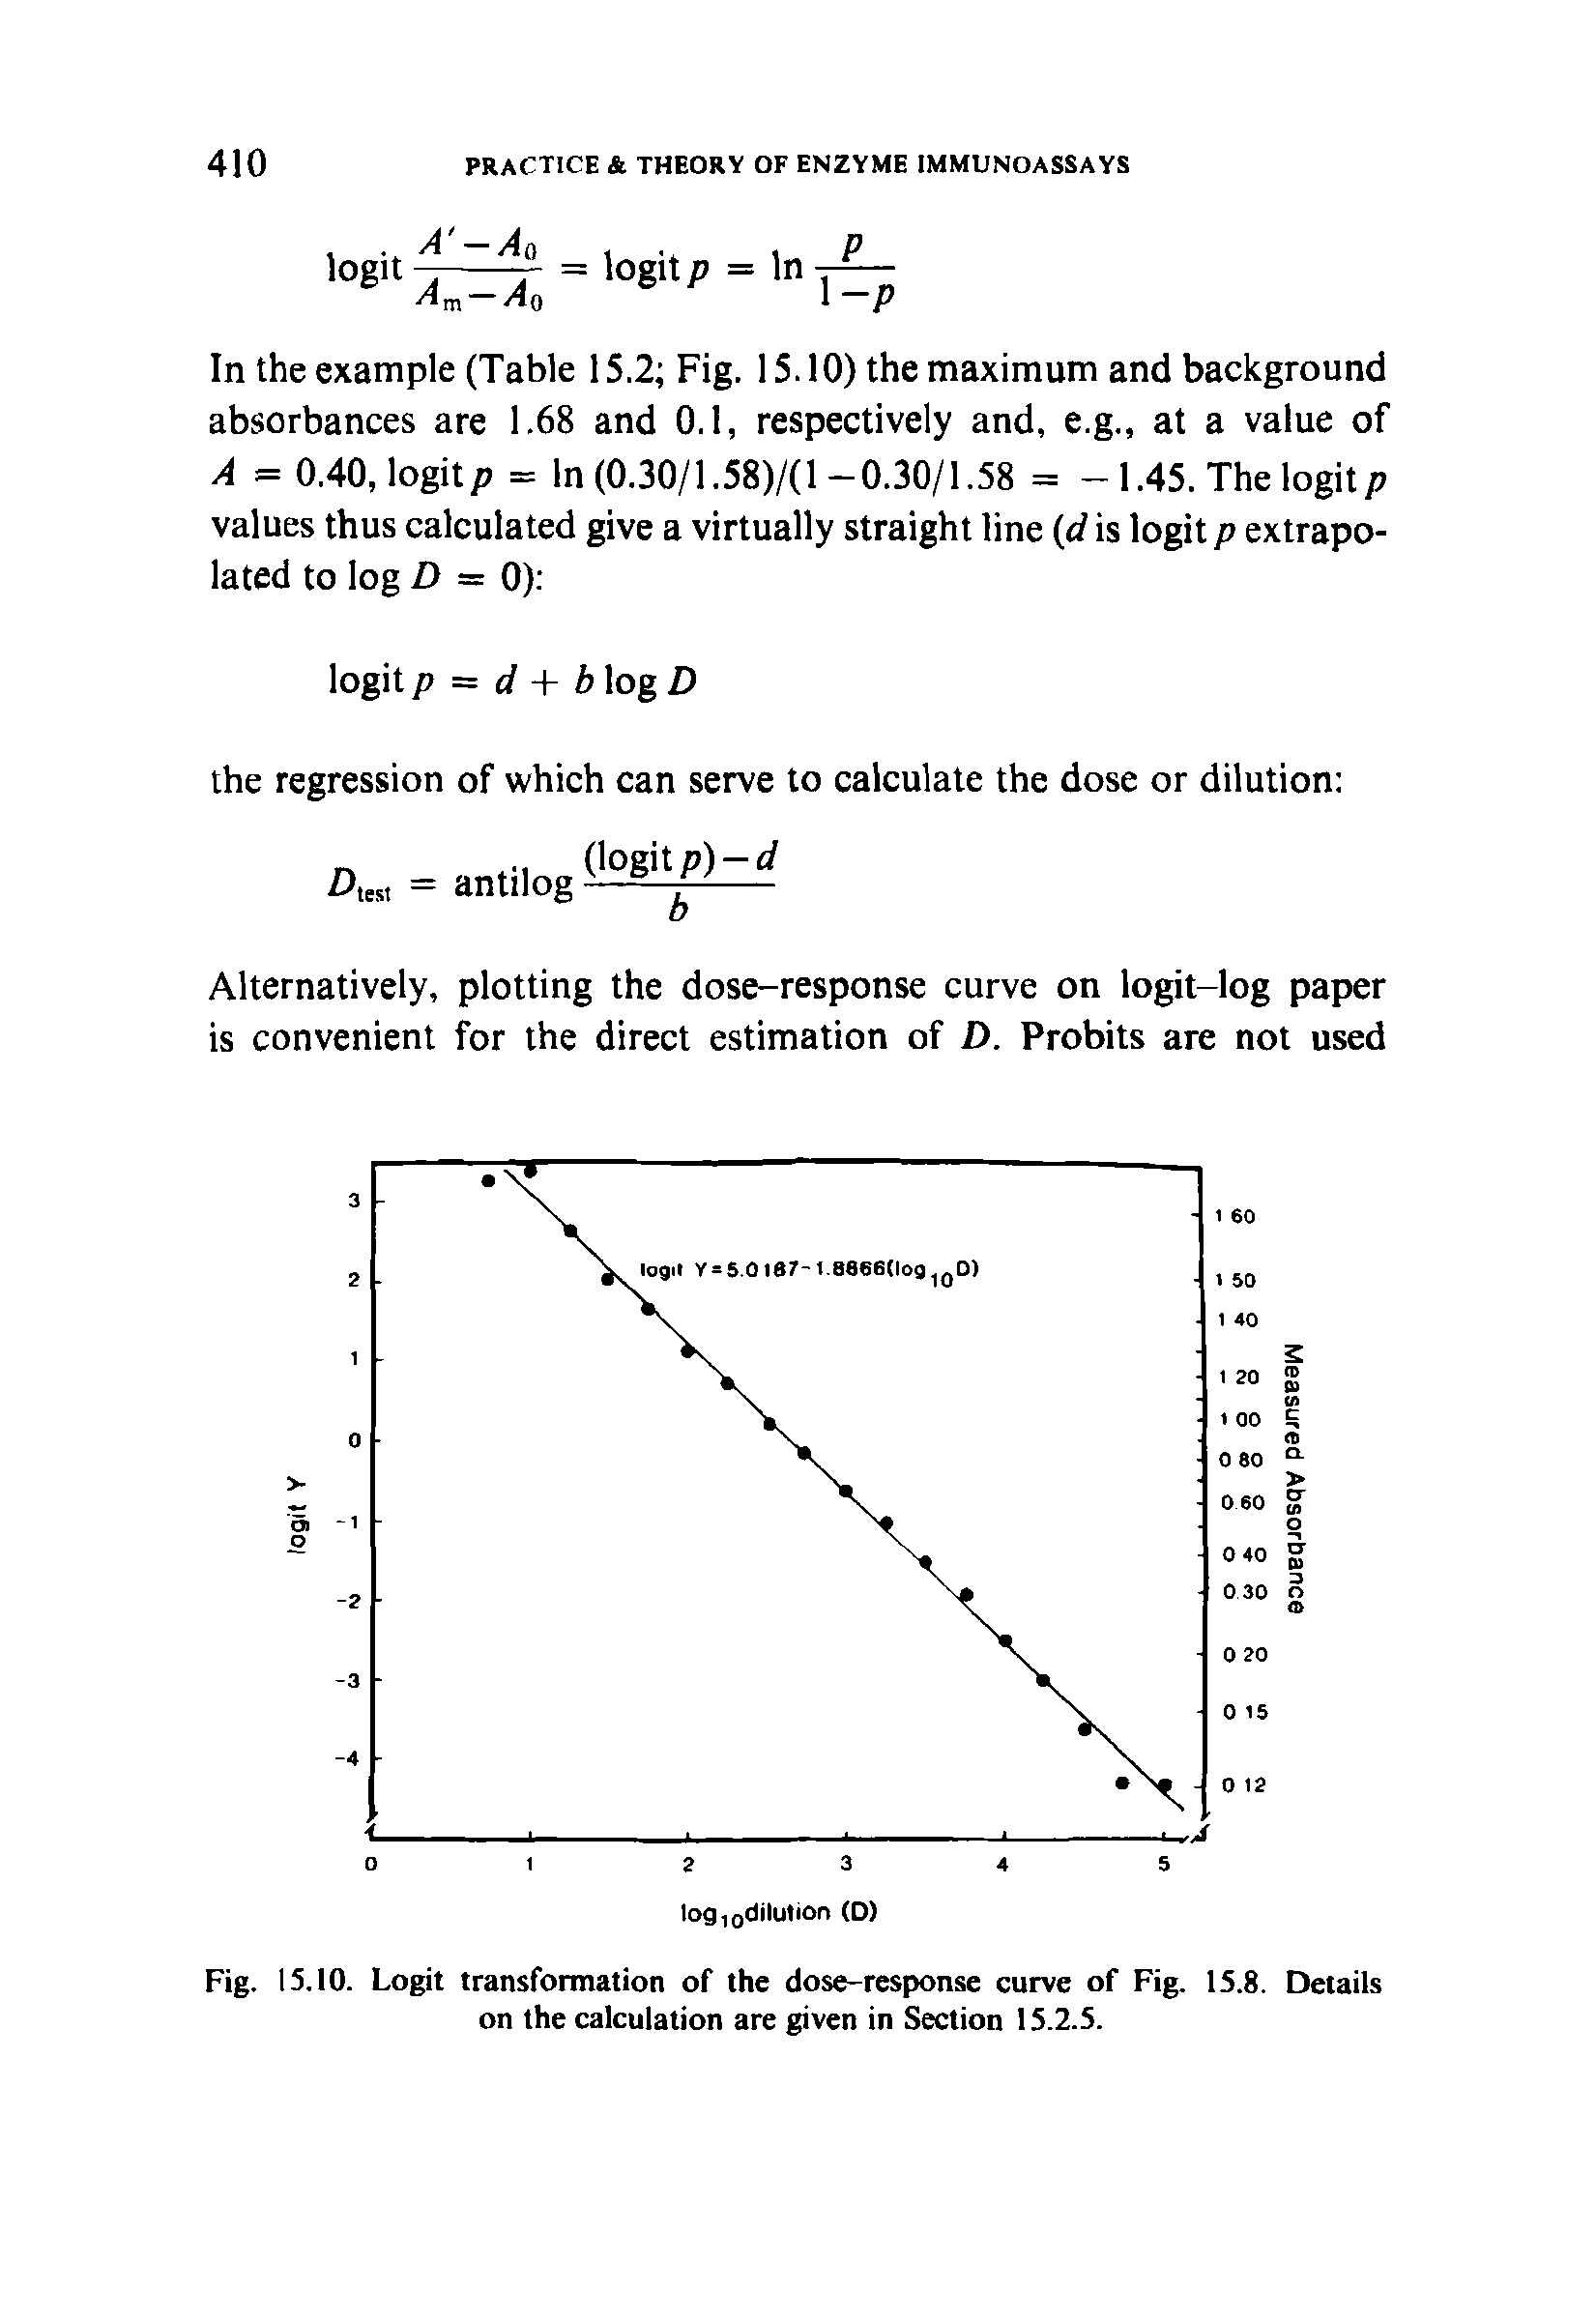 Fig. 15.10. Logit transformation of the dose-response curve of Fig. 15.8. Details on the calculation are given in Section 15.2.5.